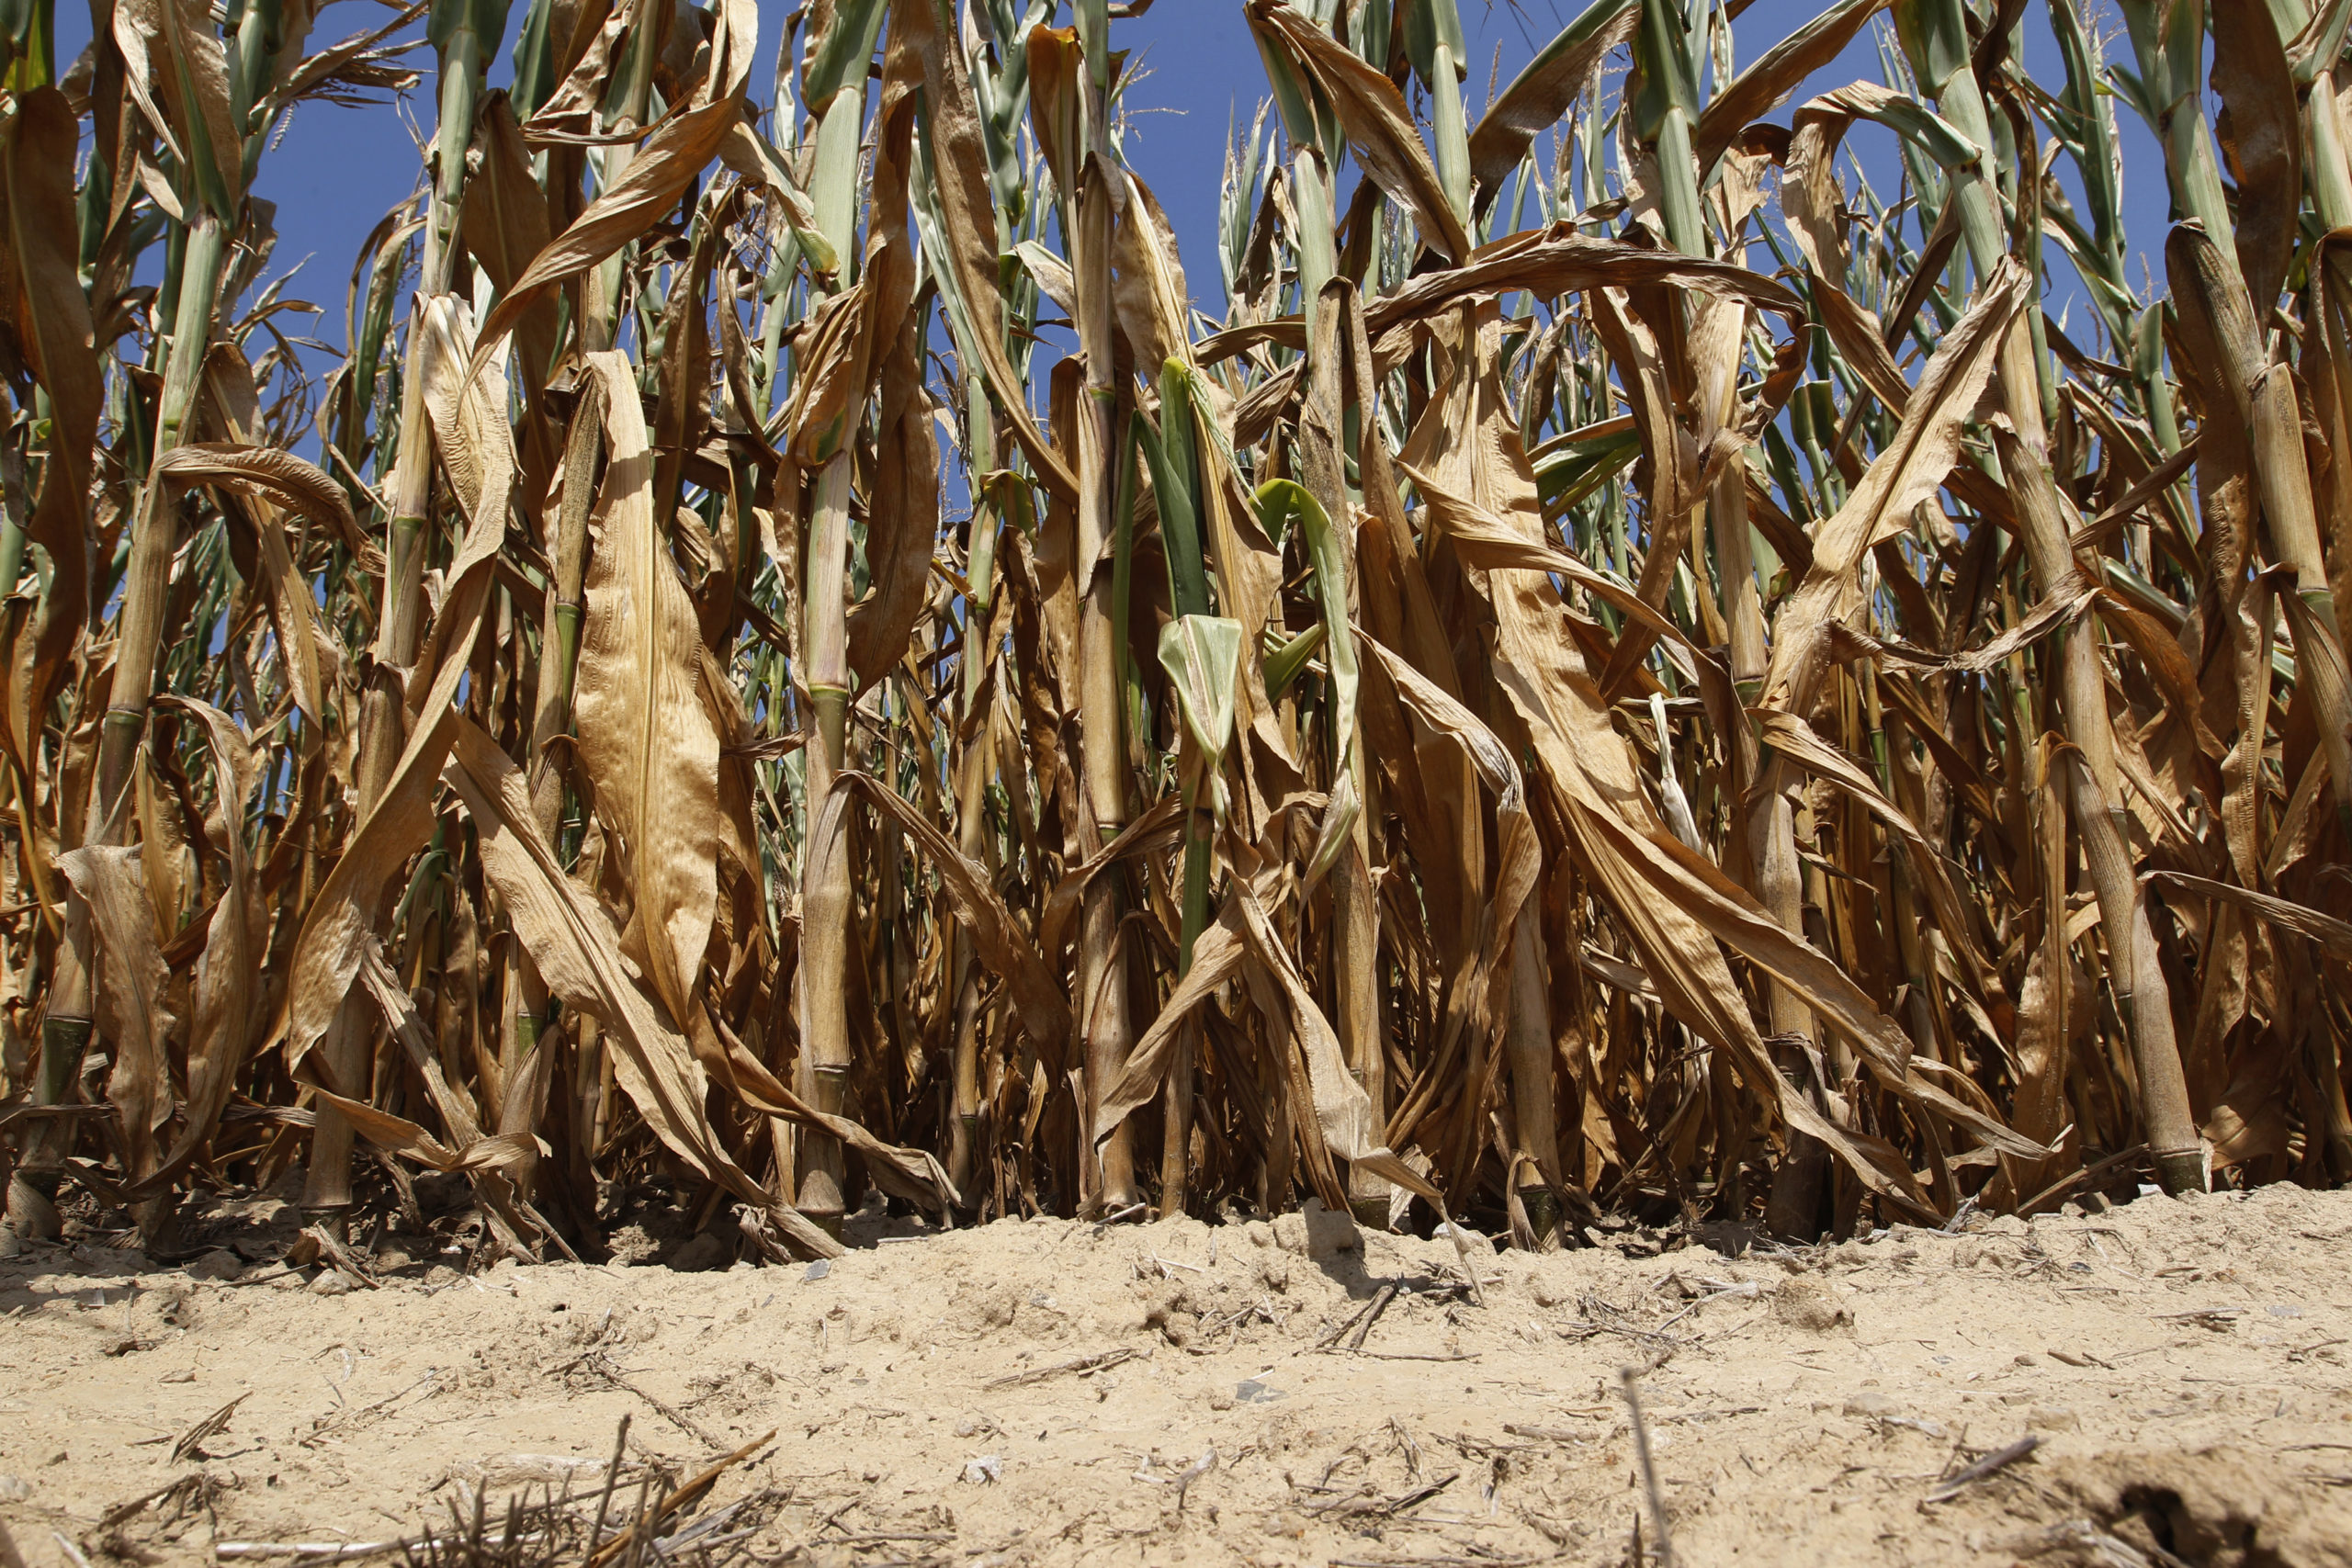 Corn plants struggle to survive in drought-stricken farm fields in Ferdinand, Indiana July 24, 2012. Welcome rains provided some relief to heat-stressed cities and worried farmers in the U.S. Midwest on Tuesday, but reports of failed crops, wildfires and other fallout from the worst U.S. drought in more than 50 years tempered any optimism. The first soaking rains for weeks in parts of the northern Midwest sent U.S. corn and soybean prices sharply lower. But those prices still hover around record highs with weather forecasts for August indicating more heat is on the way. REUTERS/ John Sommers II (UNITED STATES - Tags: AGRICULTURE DISASTER ENVIRONMENT BUSINESS)